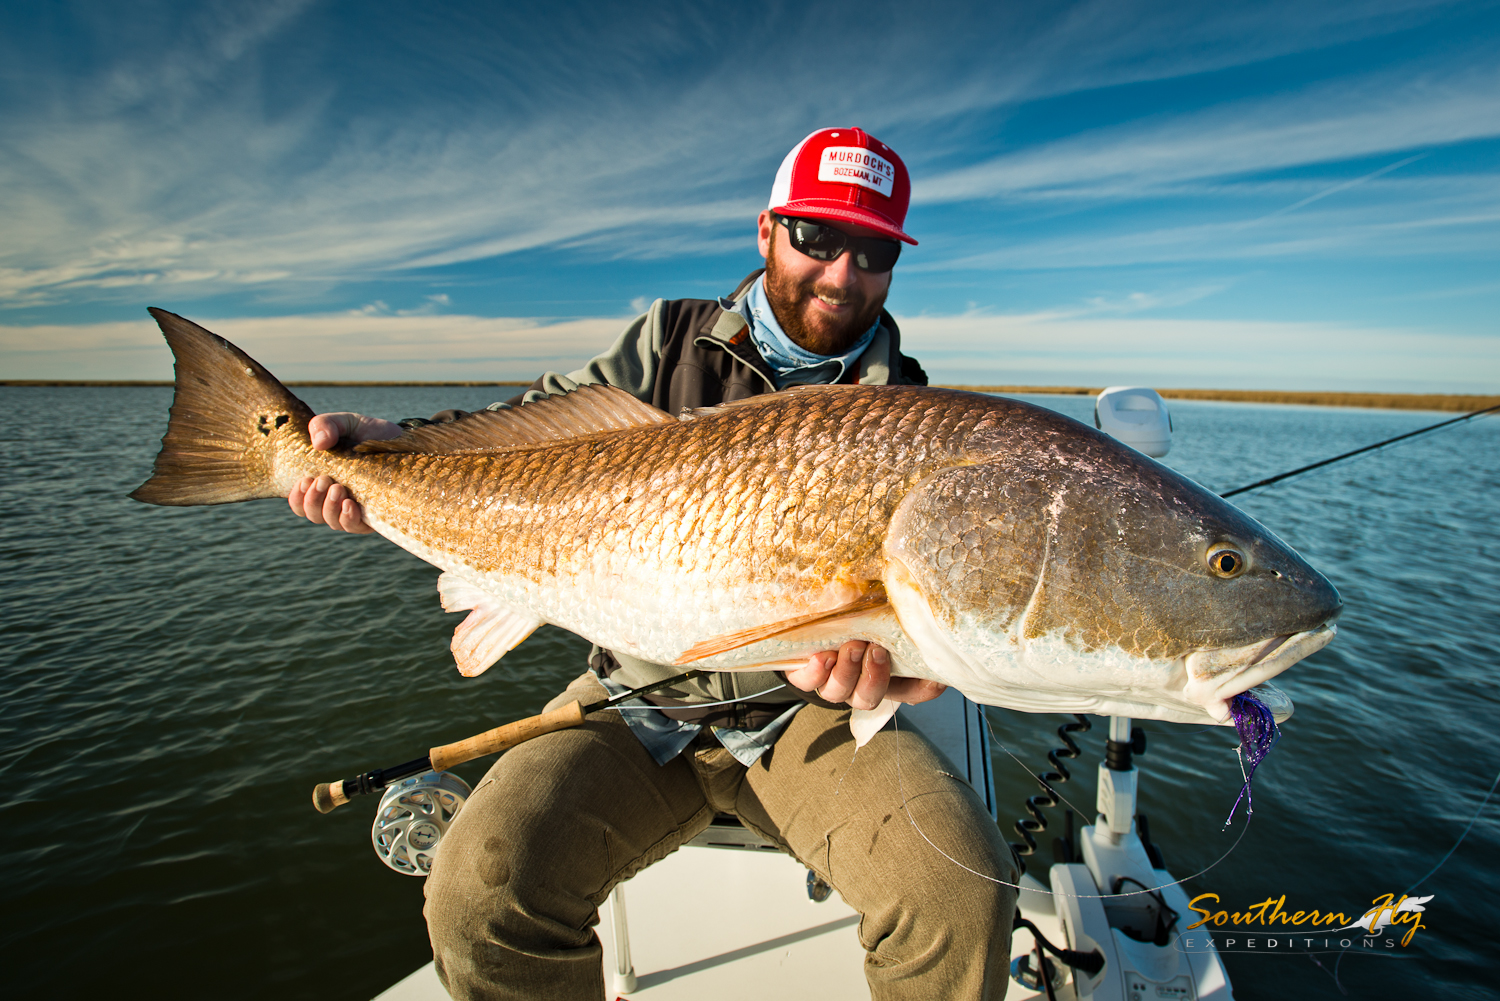 best redfish guide new orleans louisiana southern fly expeditions 